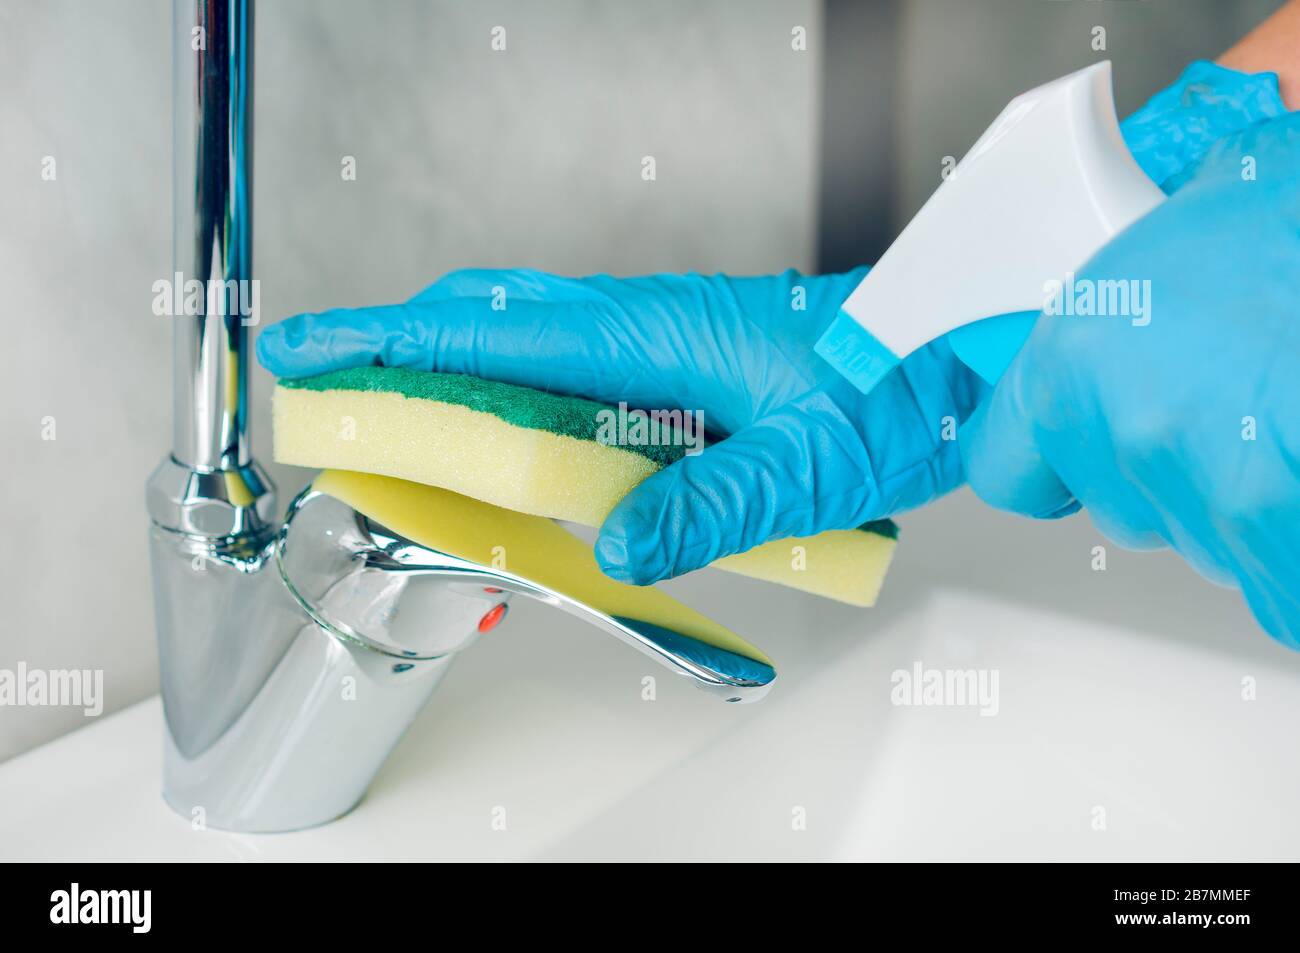 Woman with blue nitrile gloves disinfects the sink mixer after washing her hands to avoid the proliferation of viruses and bacteria Stock Photo